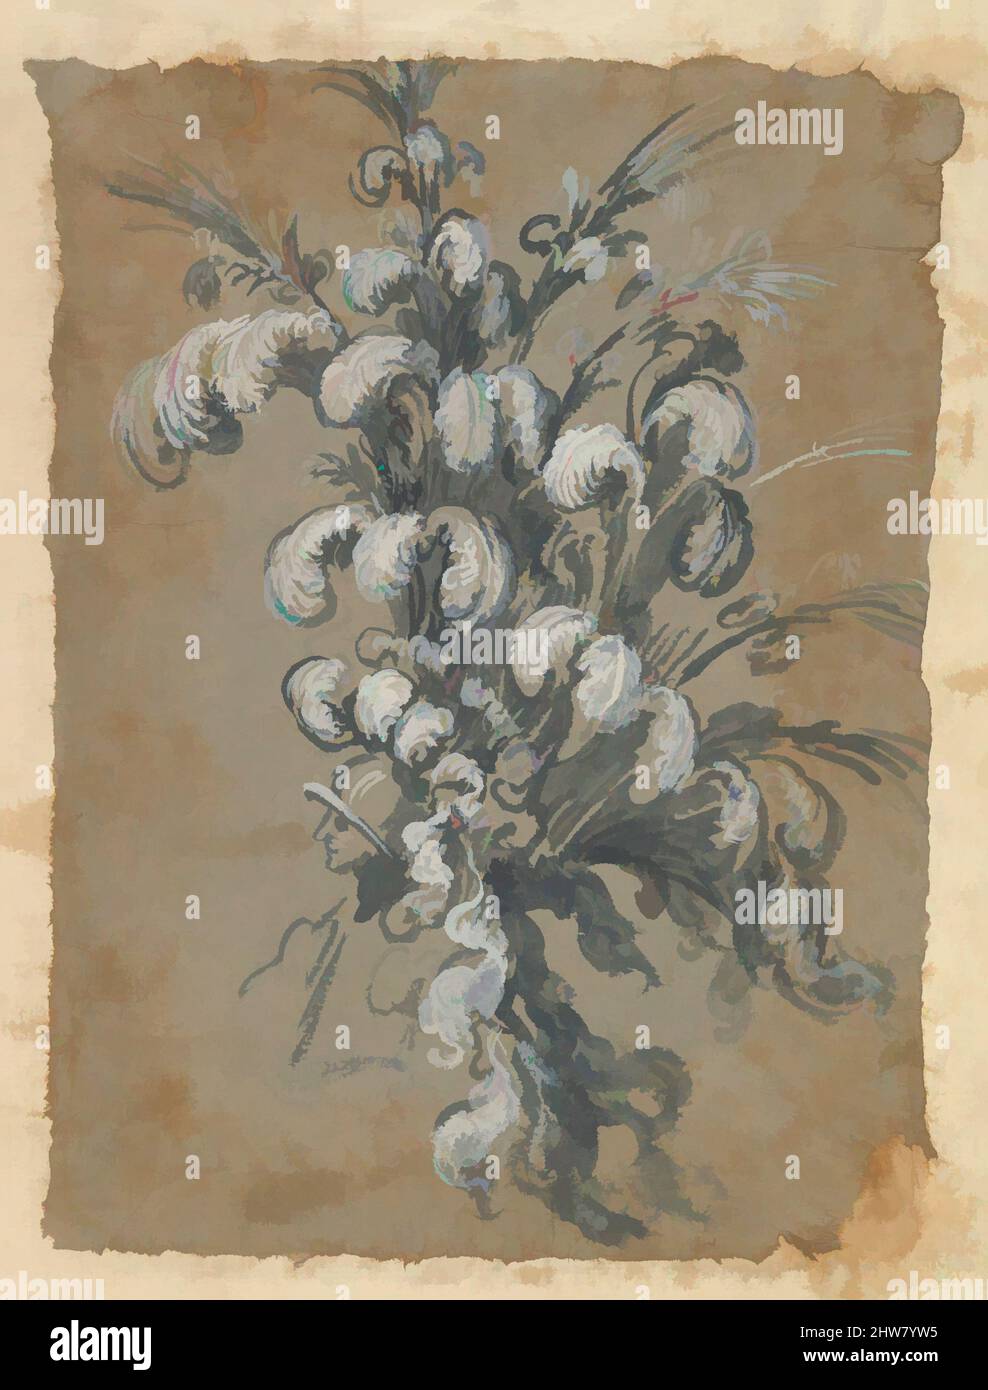 Art inspired by Design for a Lavish Headdress with Feathers on a Helmet, ca. 1620–56, Blue gouache or watercolor heightend with white, Sheet: 10 5/8 x 7 11/16 in. (27 x 19.5 cm), Possibly by Baccio del Bianco (Italian, Florence 1604–1656 Escorial) (and workshop), Design for a headdress, Classic works modernized by Artotop with a splash of modernity. Shapes, color and value, eye-catching visual impact on art. Emotions through freedom of artworks in a contemporary way. A timeless message pursuing a wildly creative new direction. Artists turning to the digital medium and creating the Artotop NFT Stock Photo